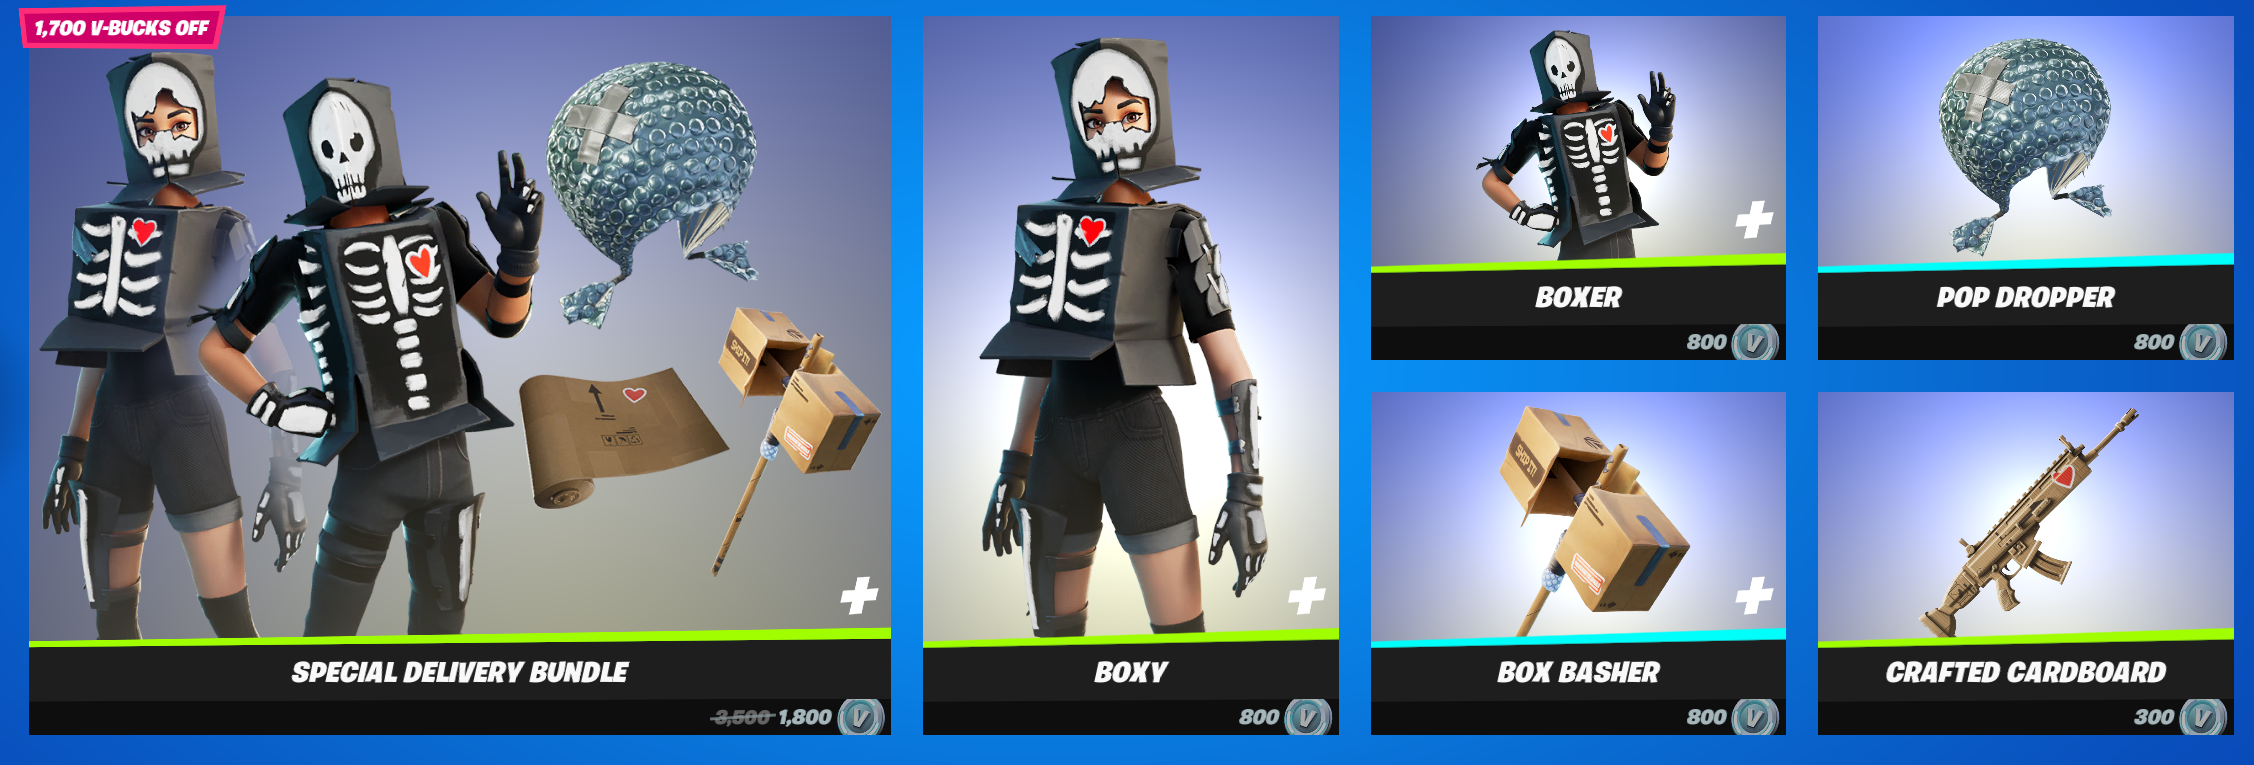 New Special Delivery Bundle Available Now